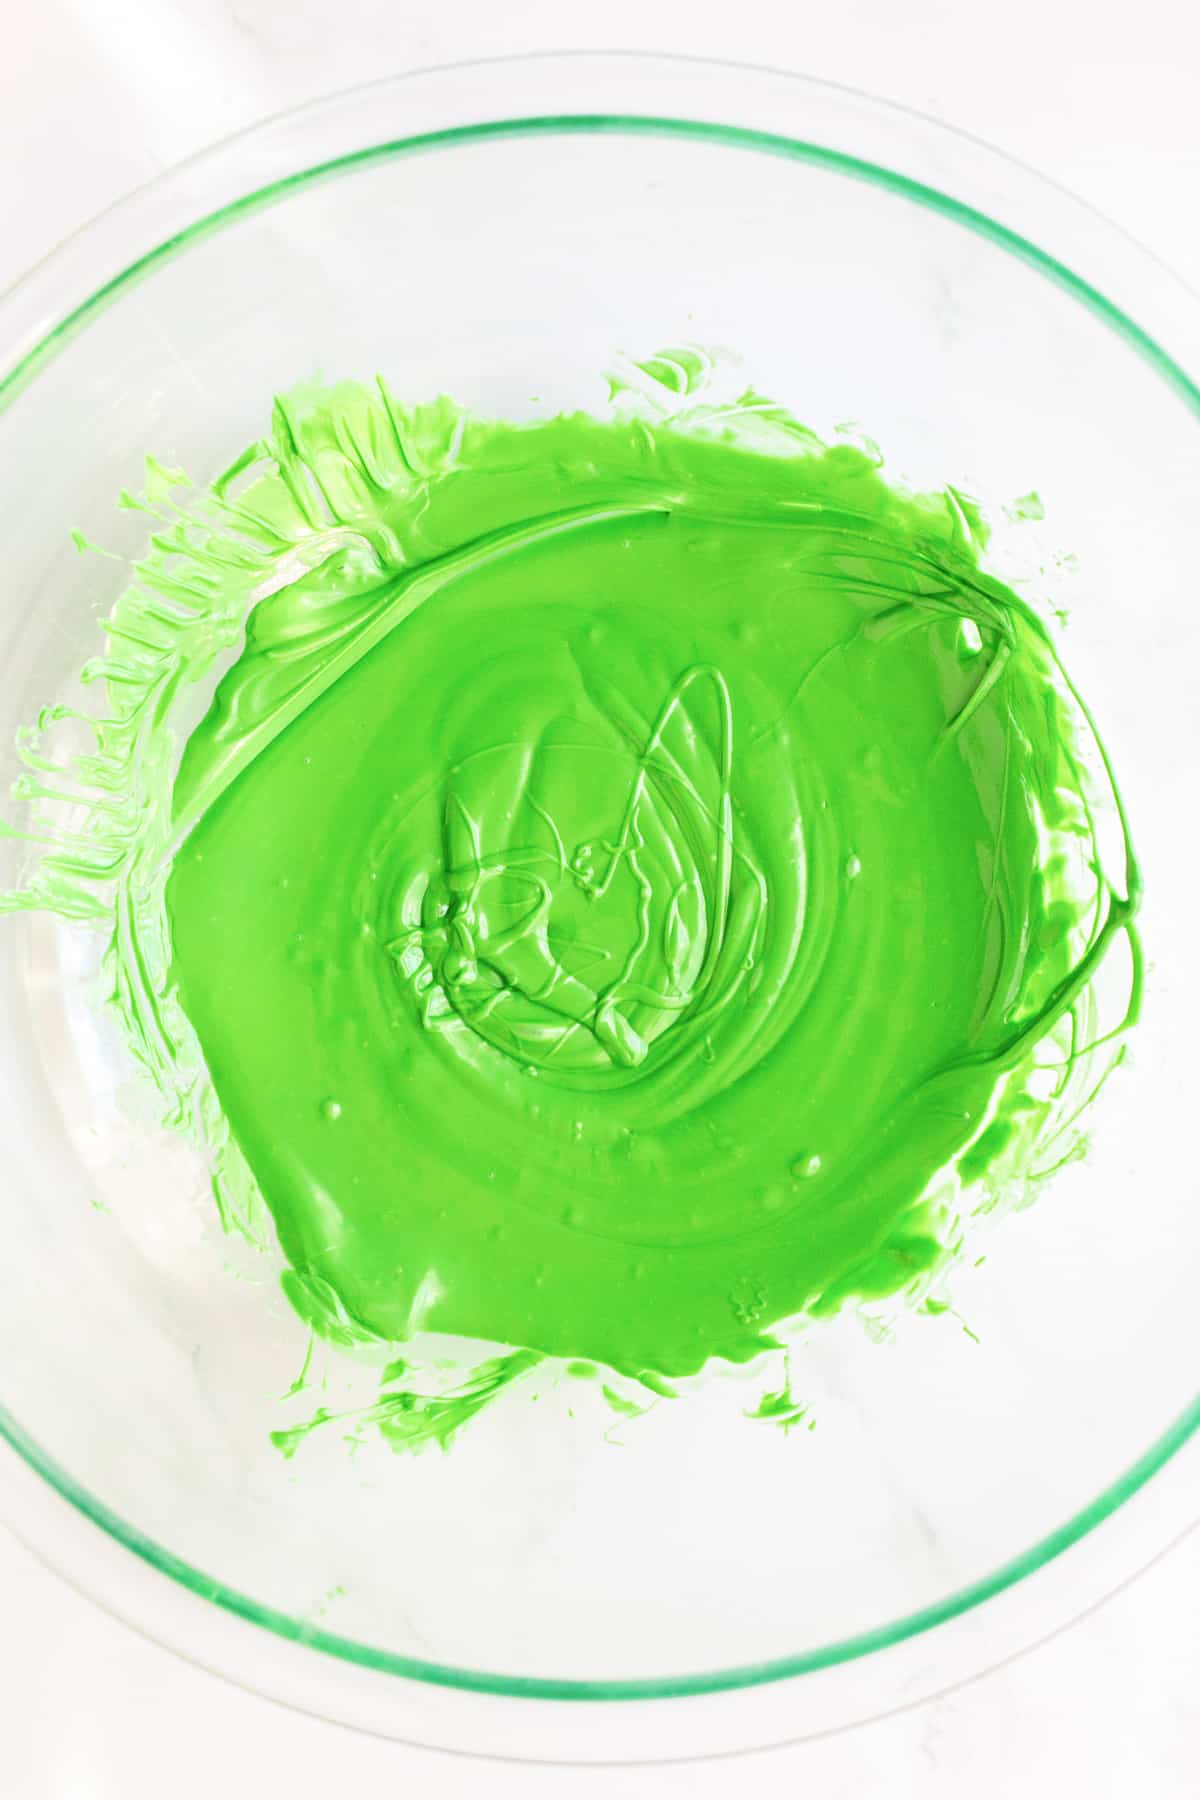 Melted green chocolate in a large bowl from above.